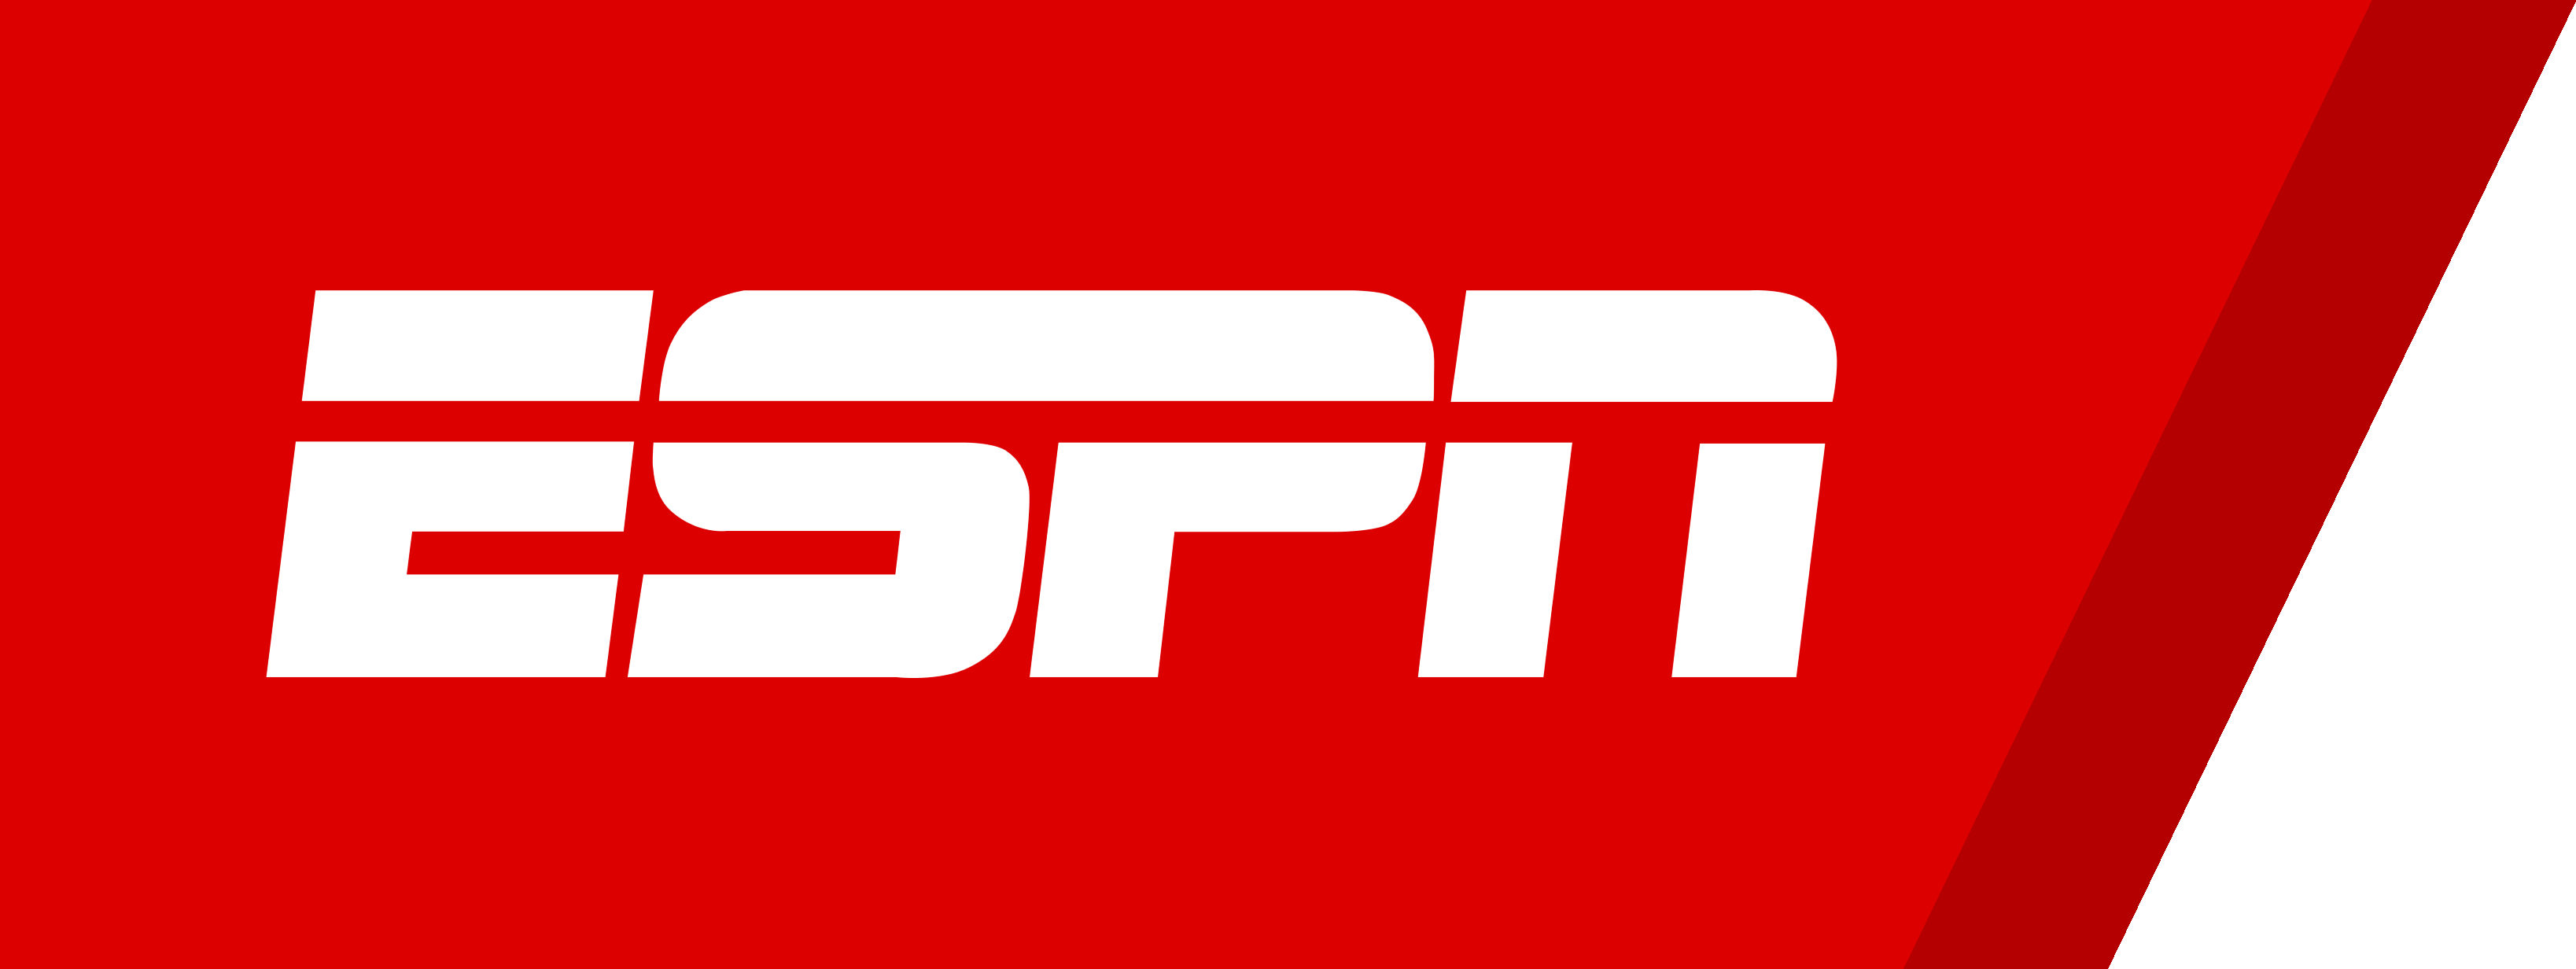 ESPN And Penn National Gaming Agree To $3 Billion Deal